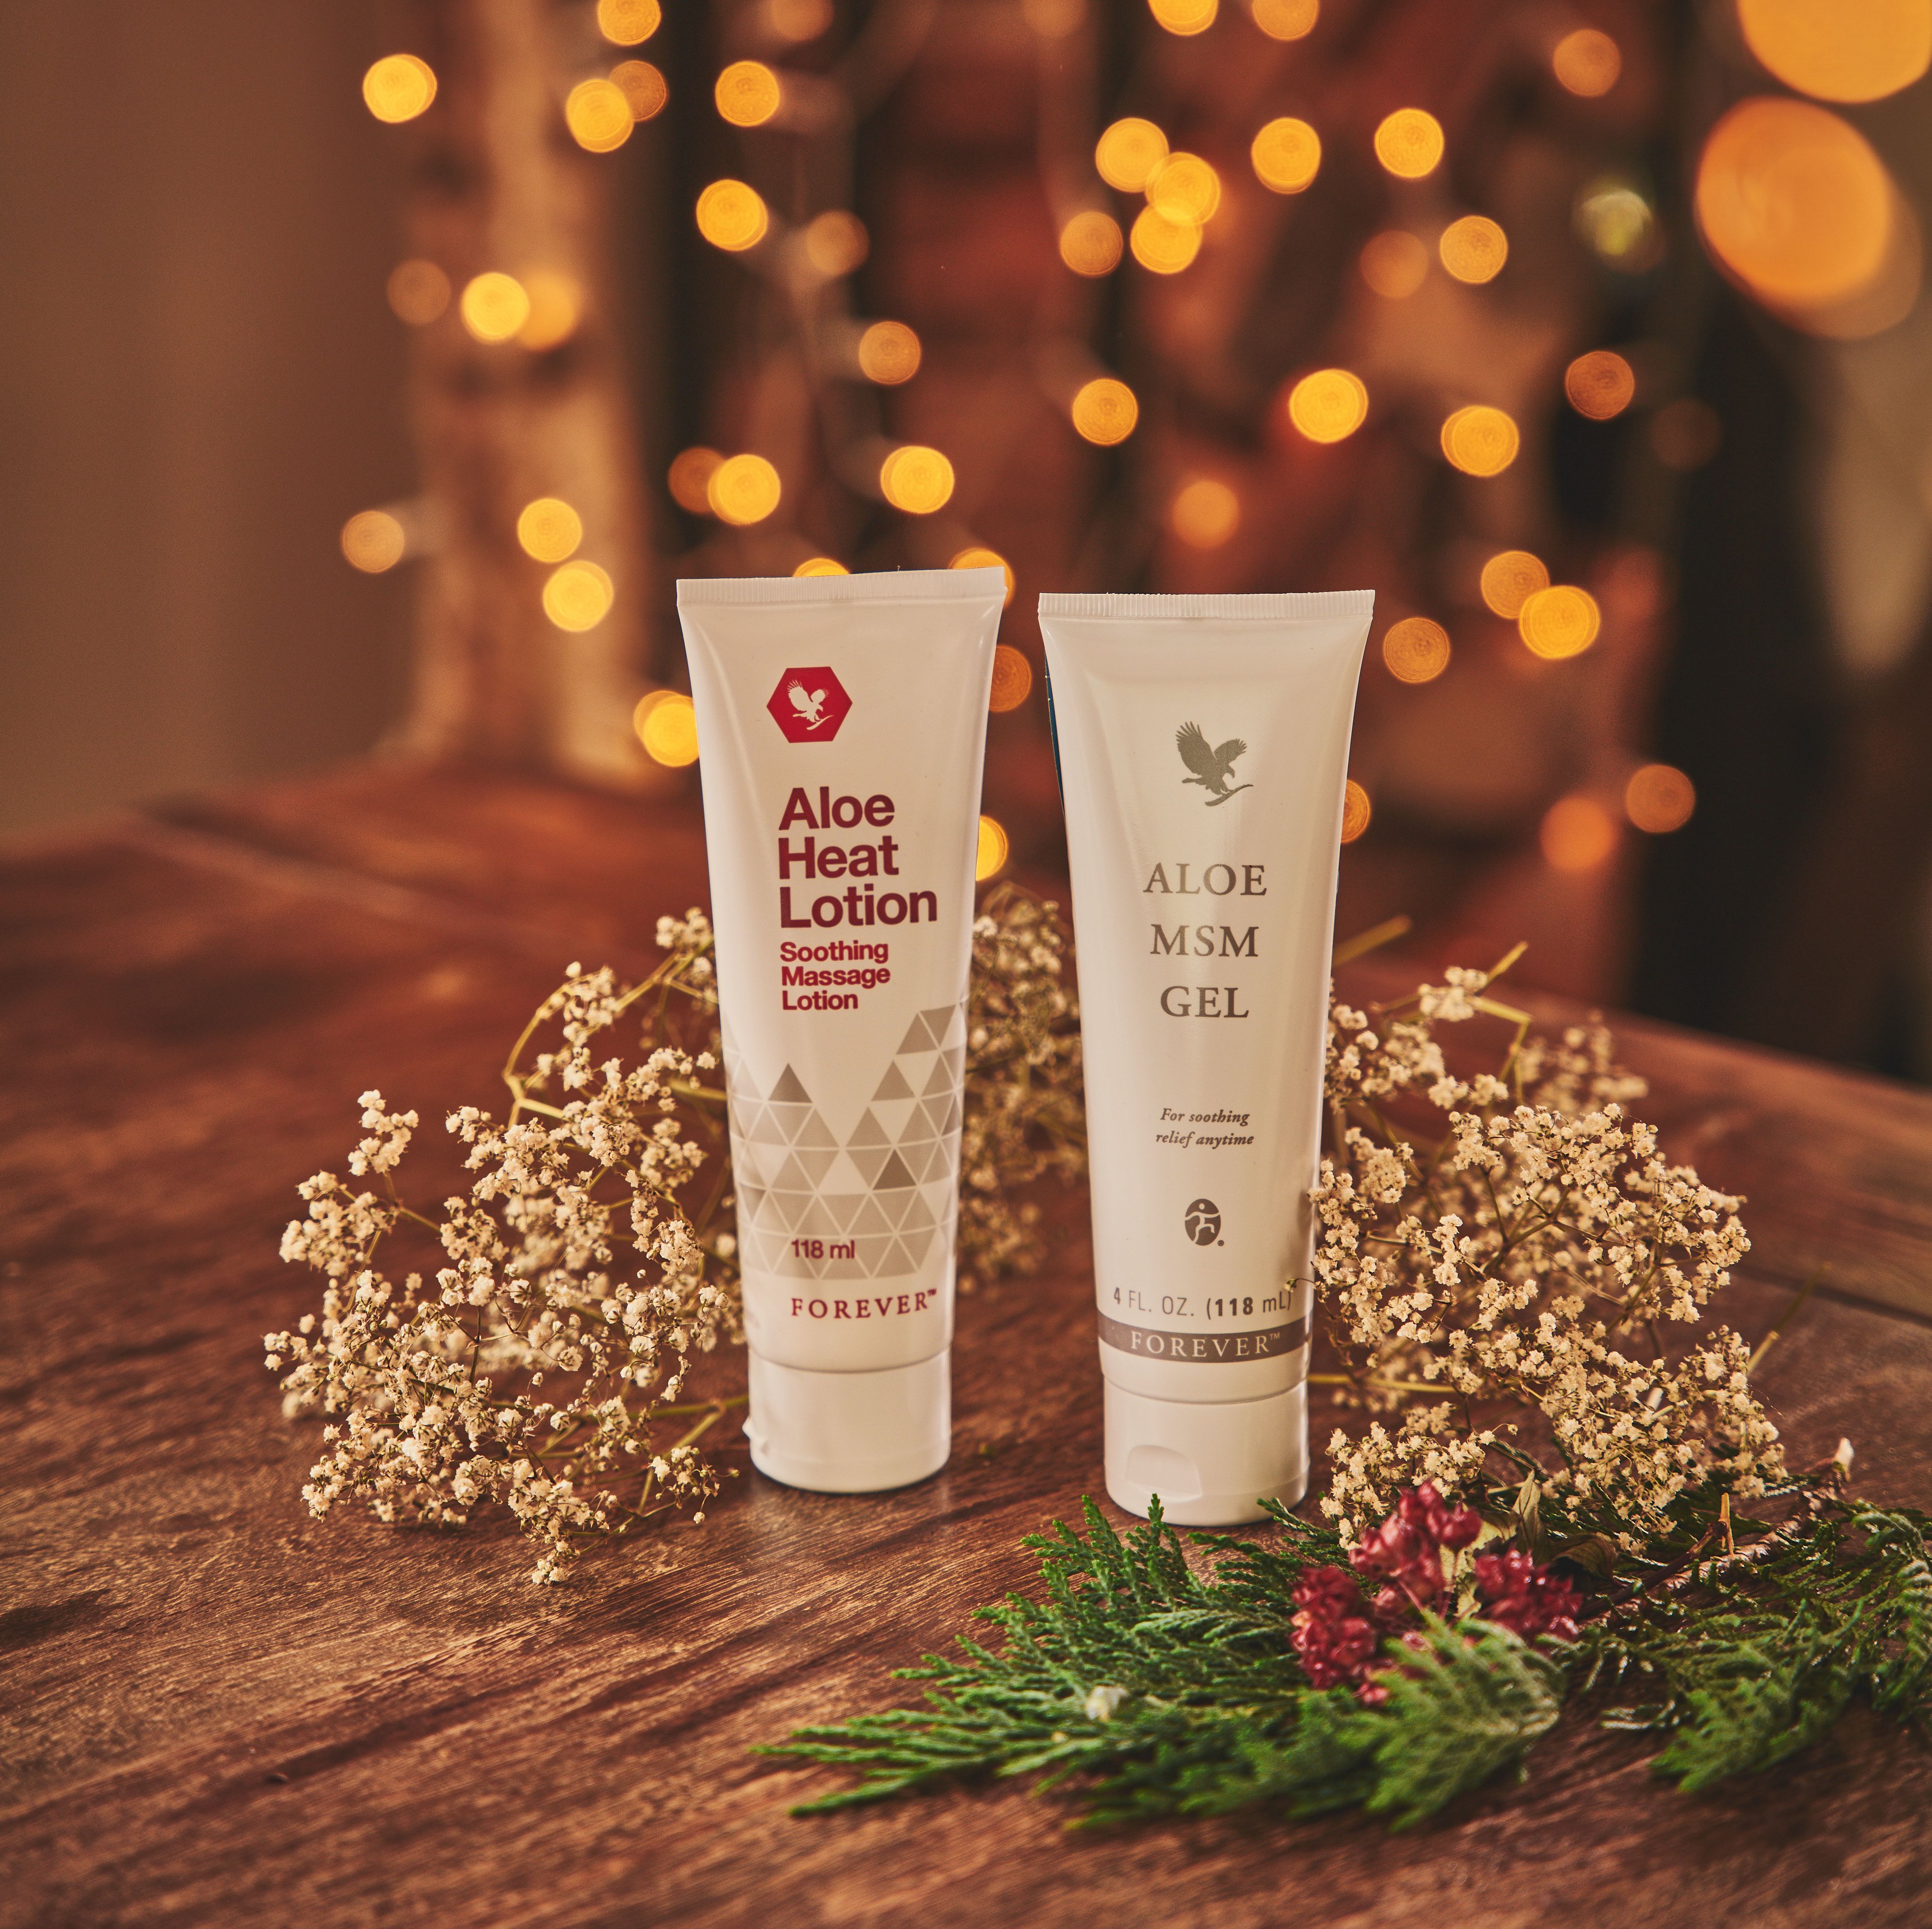 Forever Living Products International Twitter: "Treat yourself or a loved one to a relaxing massage with Aloe Heat Lotion and MSM Gel this holiday season. Not will these products